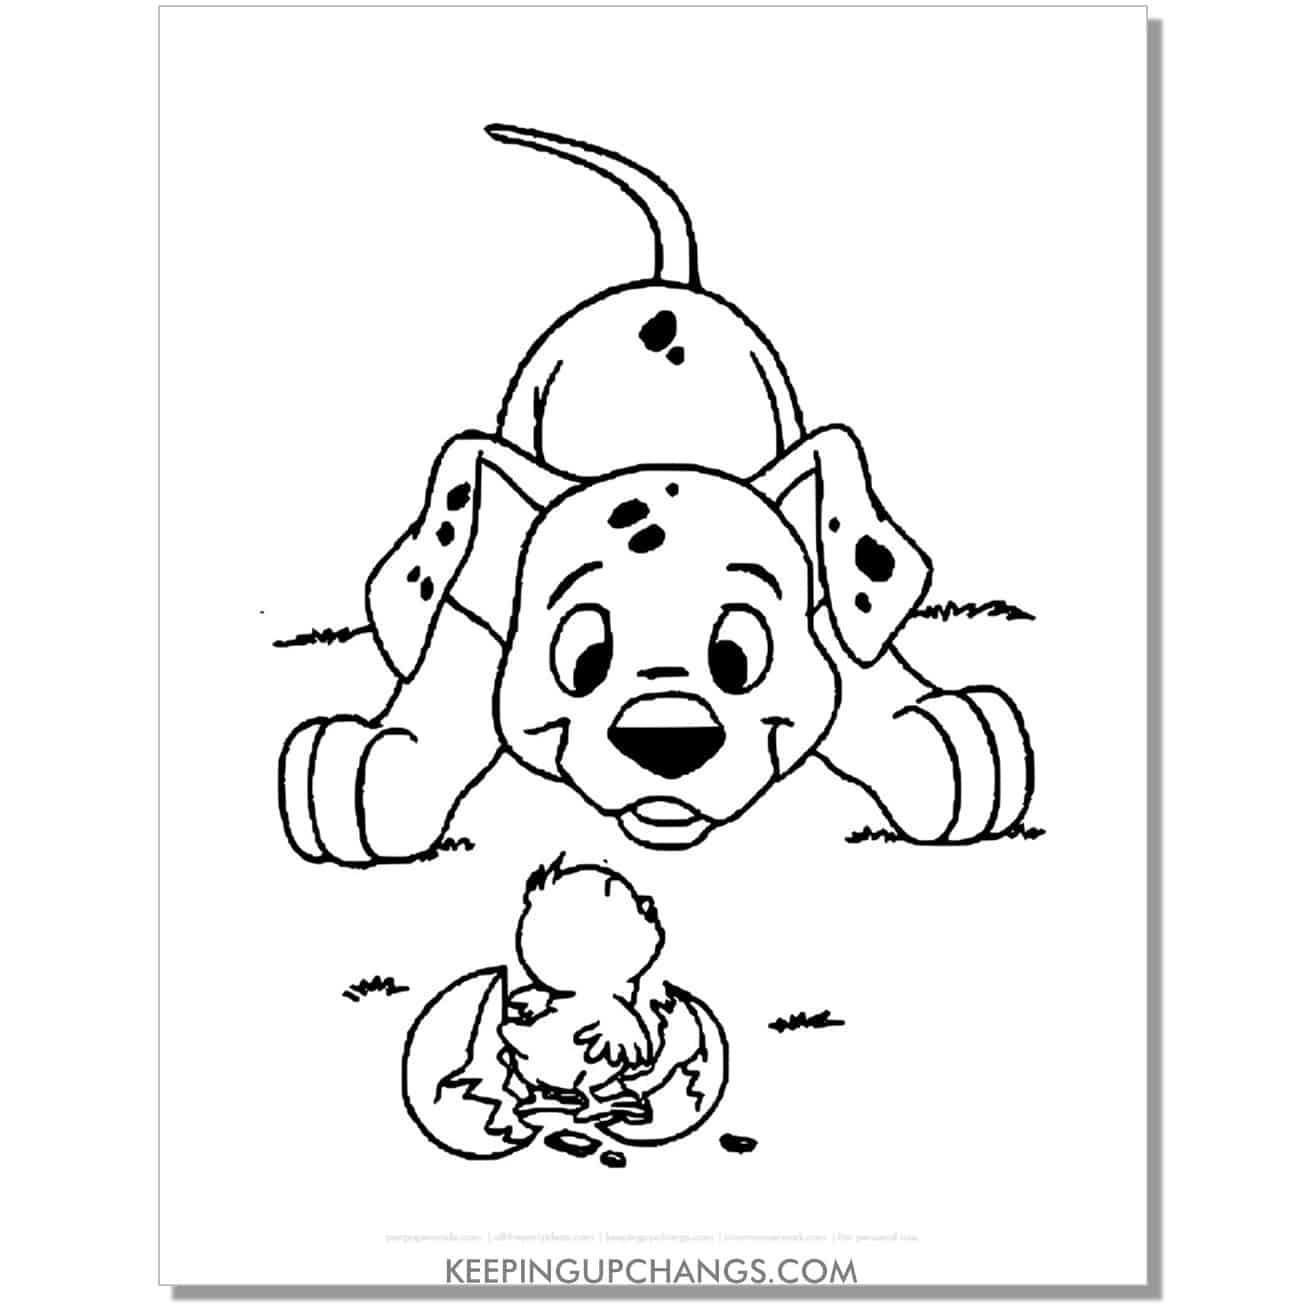 free rolly watching baby chick hatching from egg 101 dalmations coloring page, sheet.